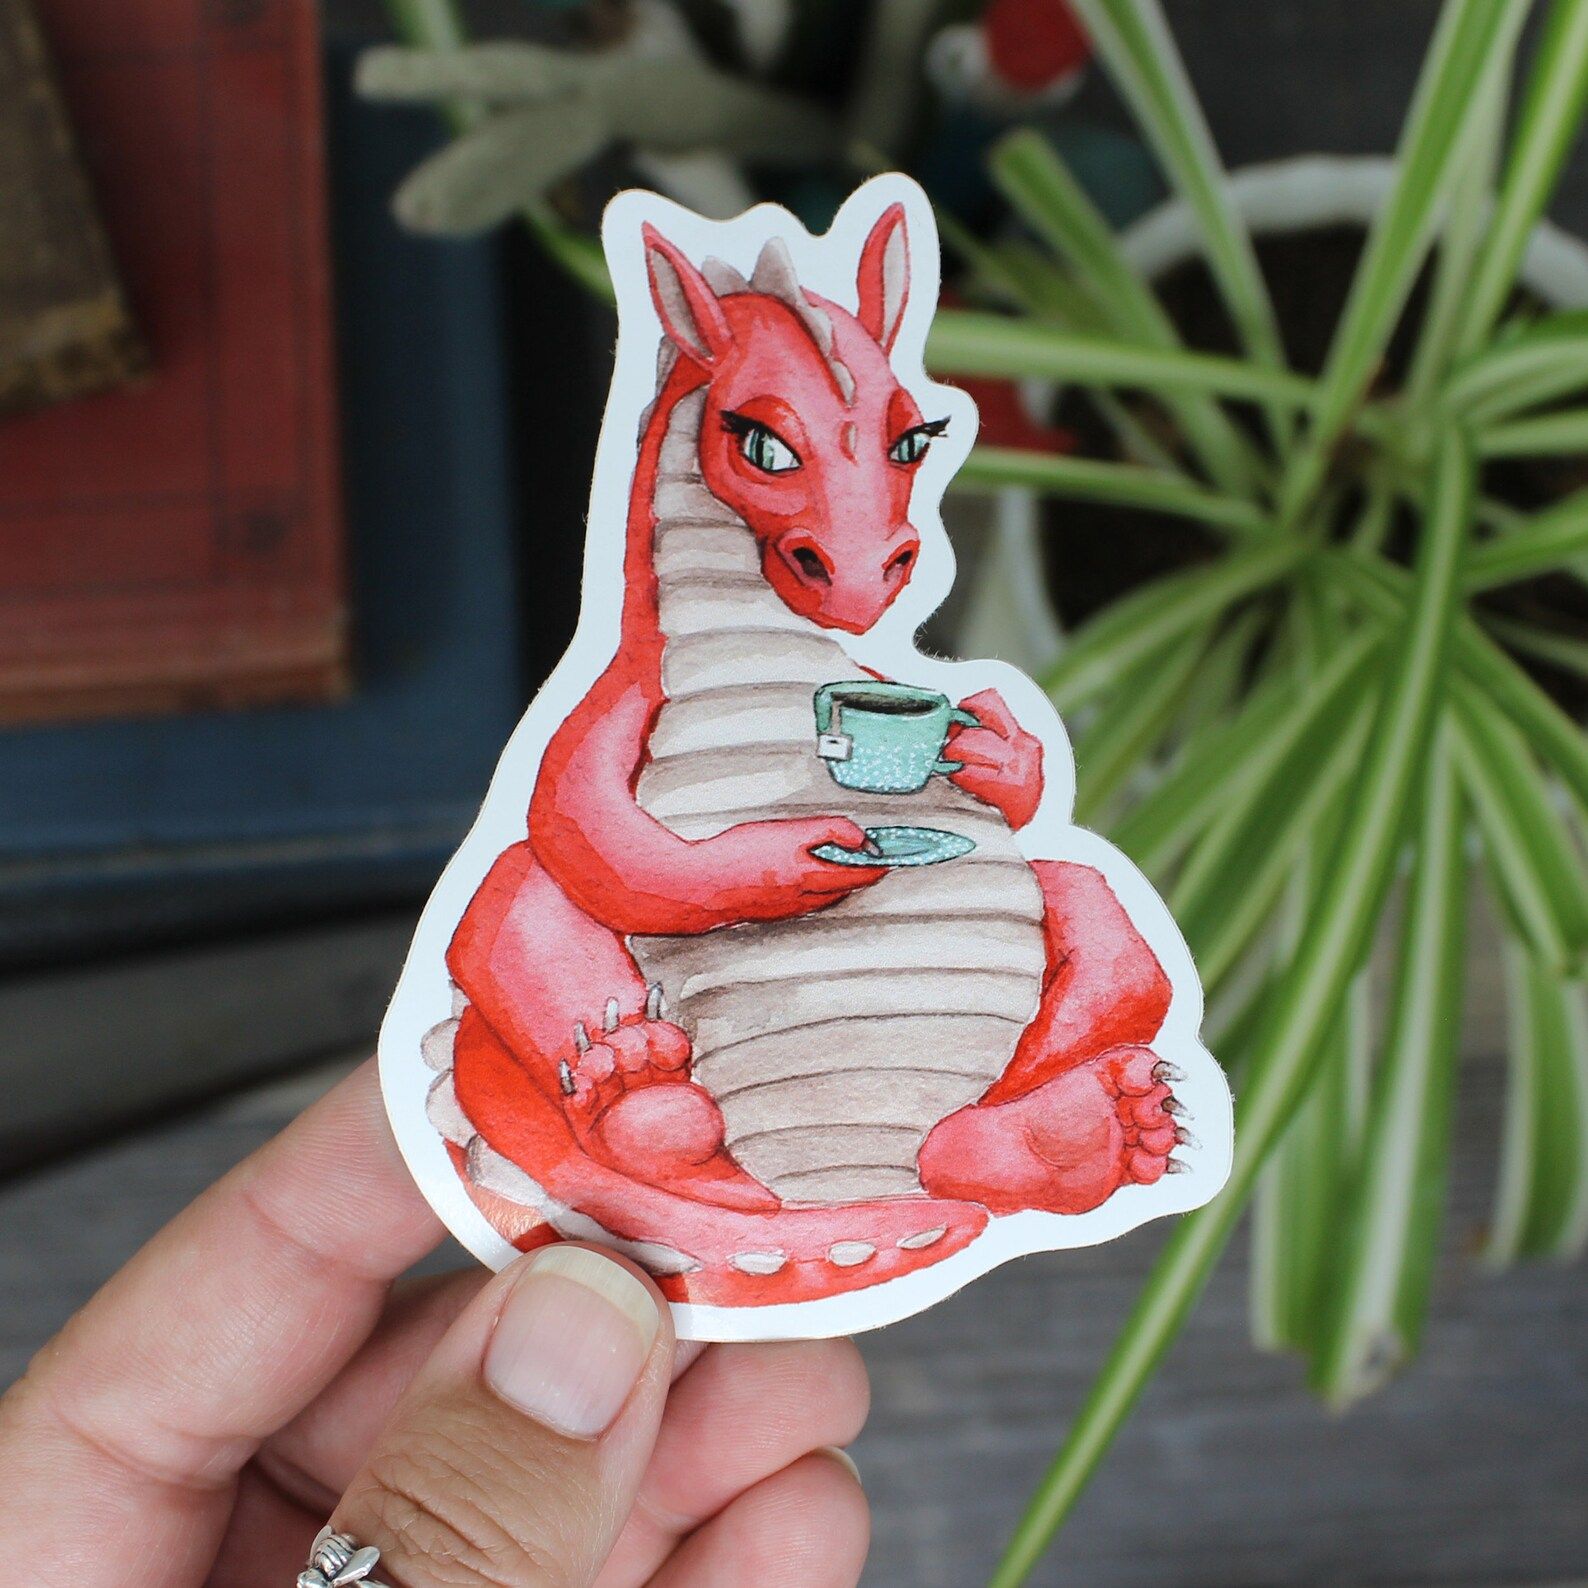 Etsy: A sticker featuring a cartoon-style dragon holding a cup of tea.